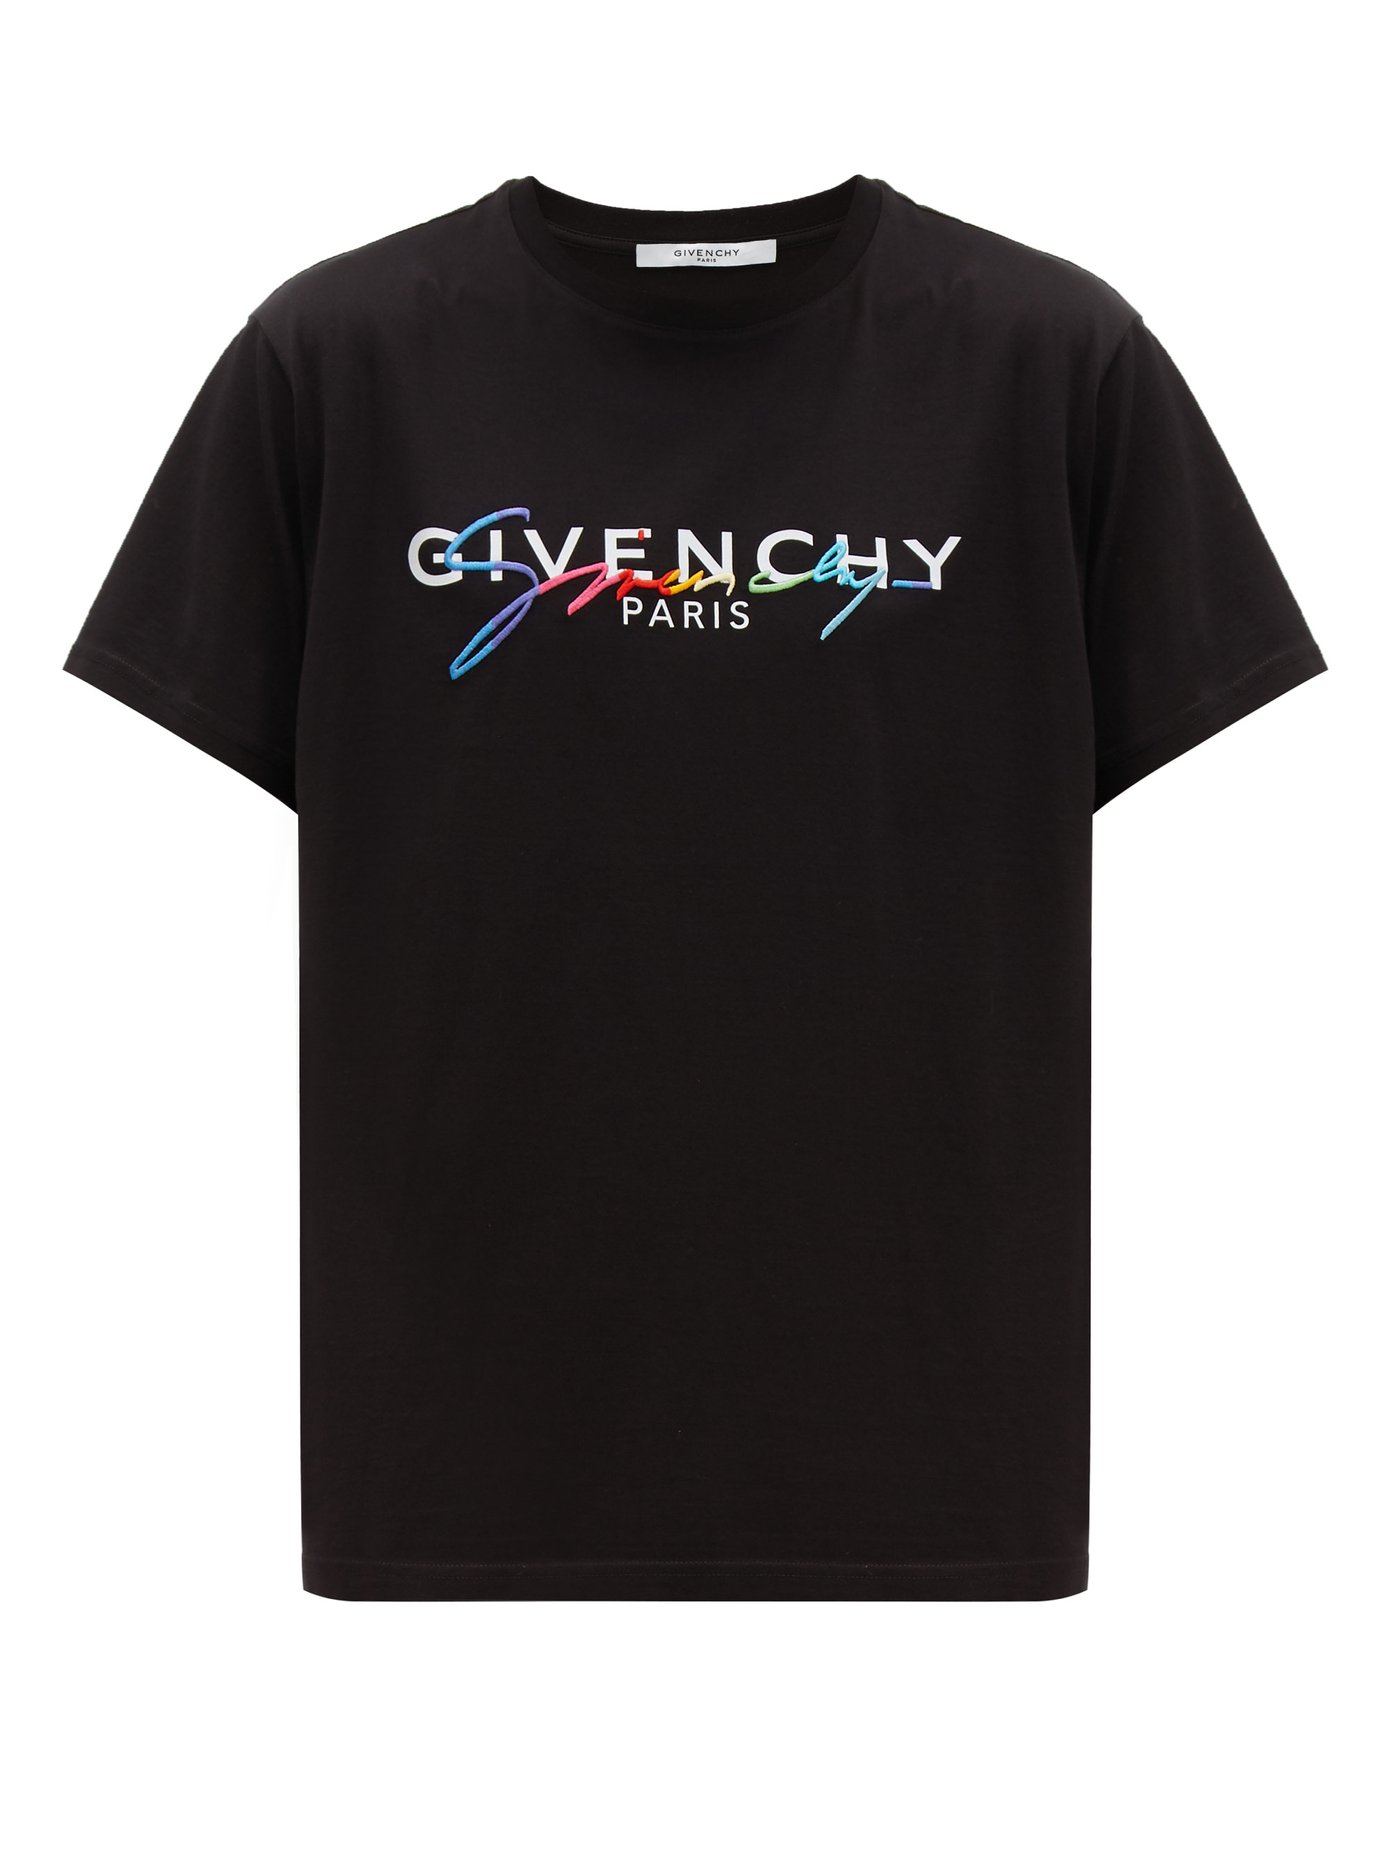 Total 60+ imagen rainbow givenchy shirt